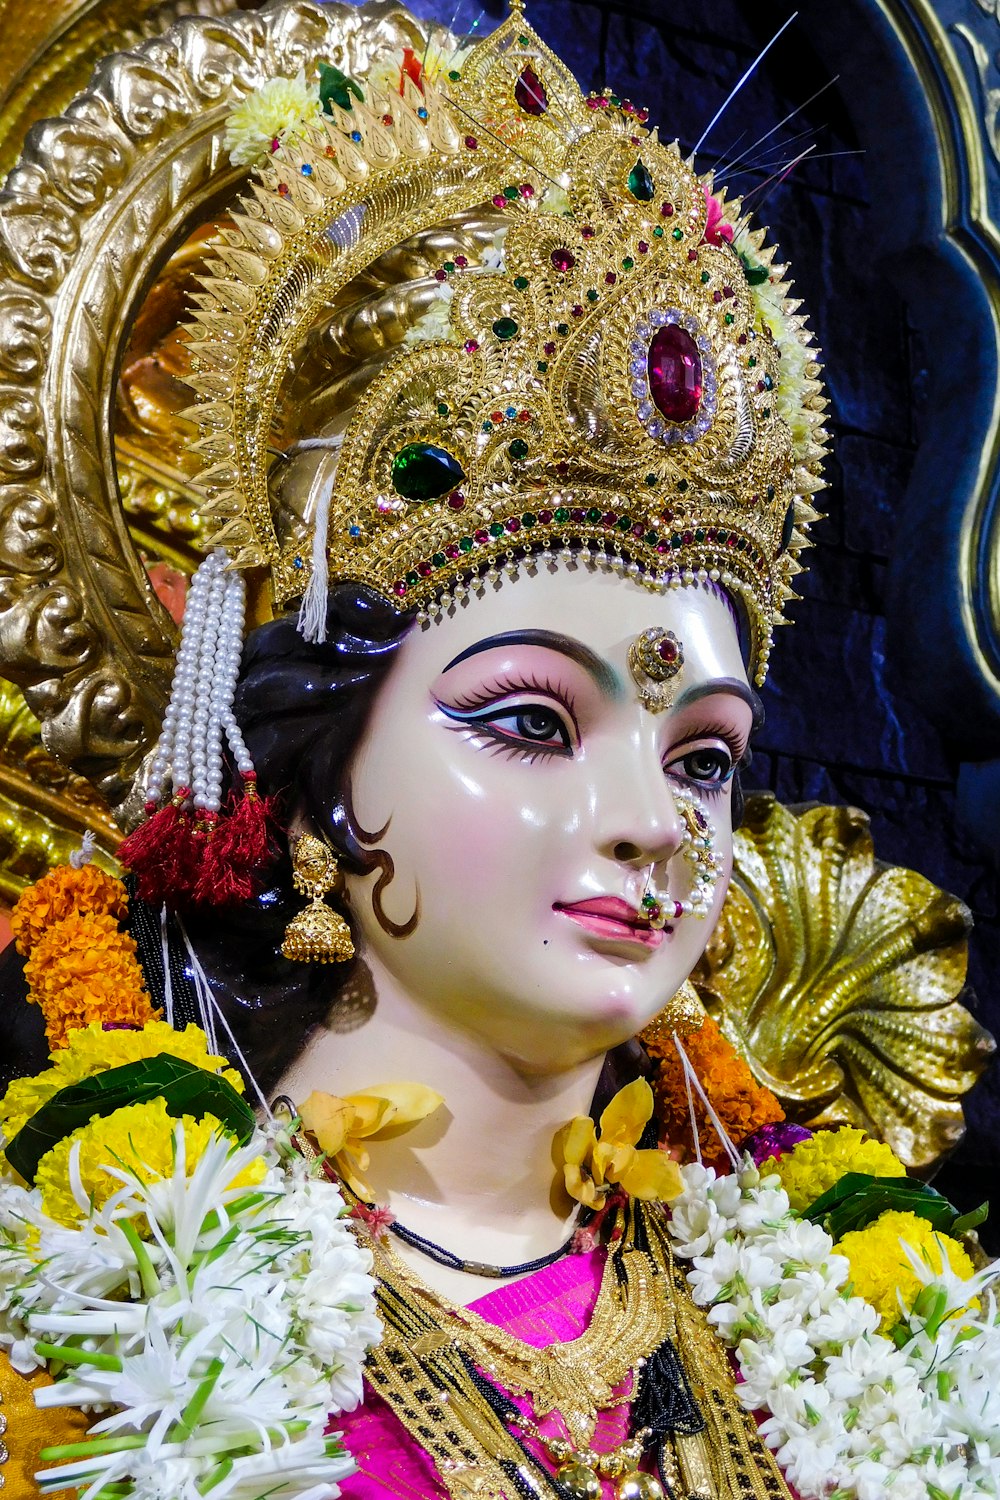 Over 999+ Stunning Durga Devi Images – Extensive Collection of Durga Devi Images in Full 4K Resolution